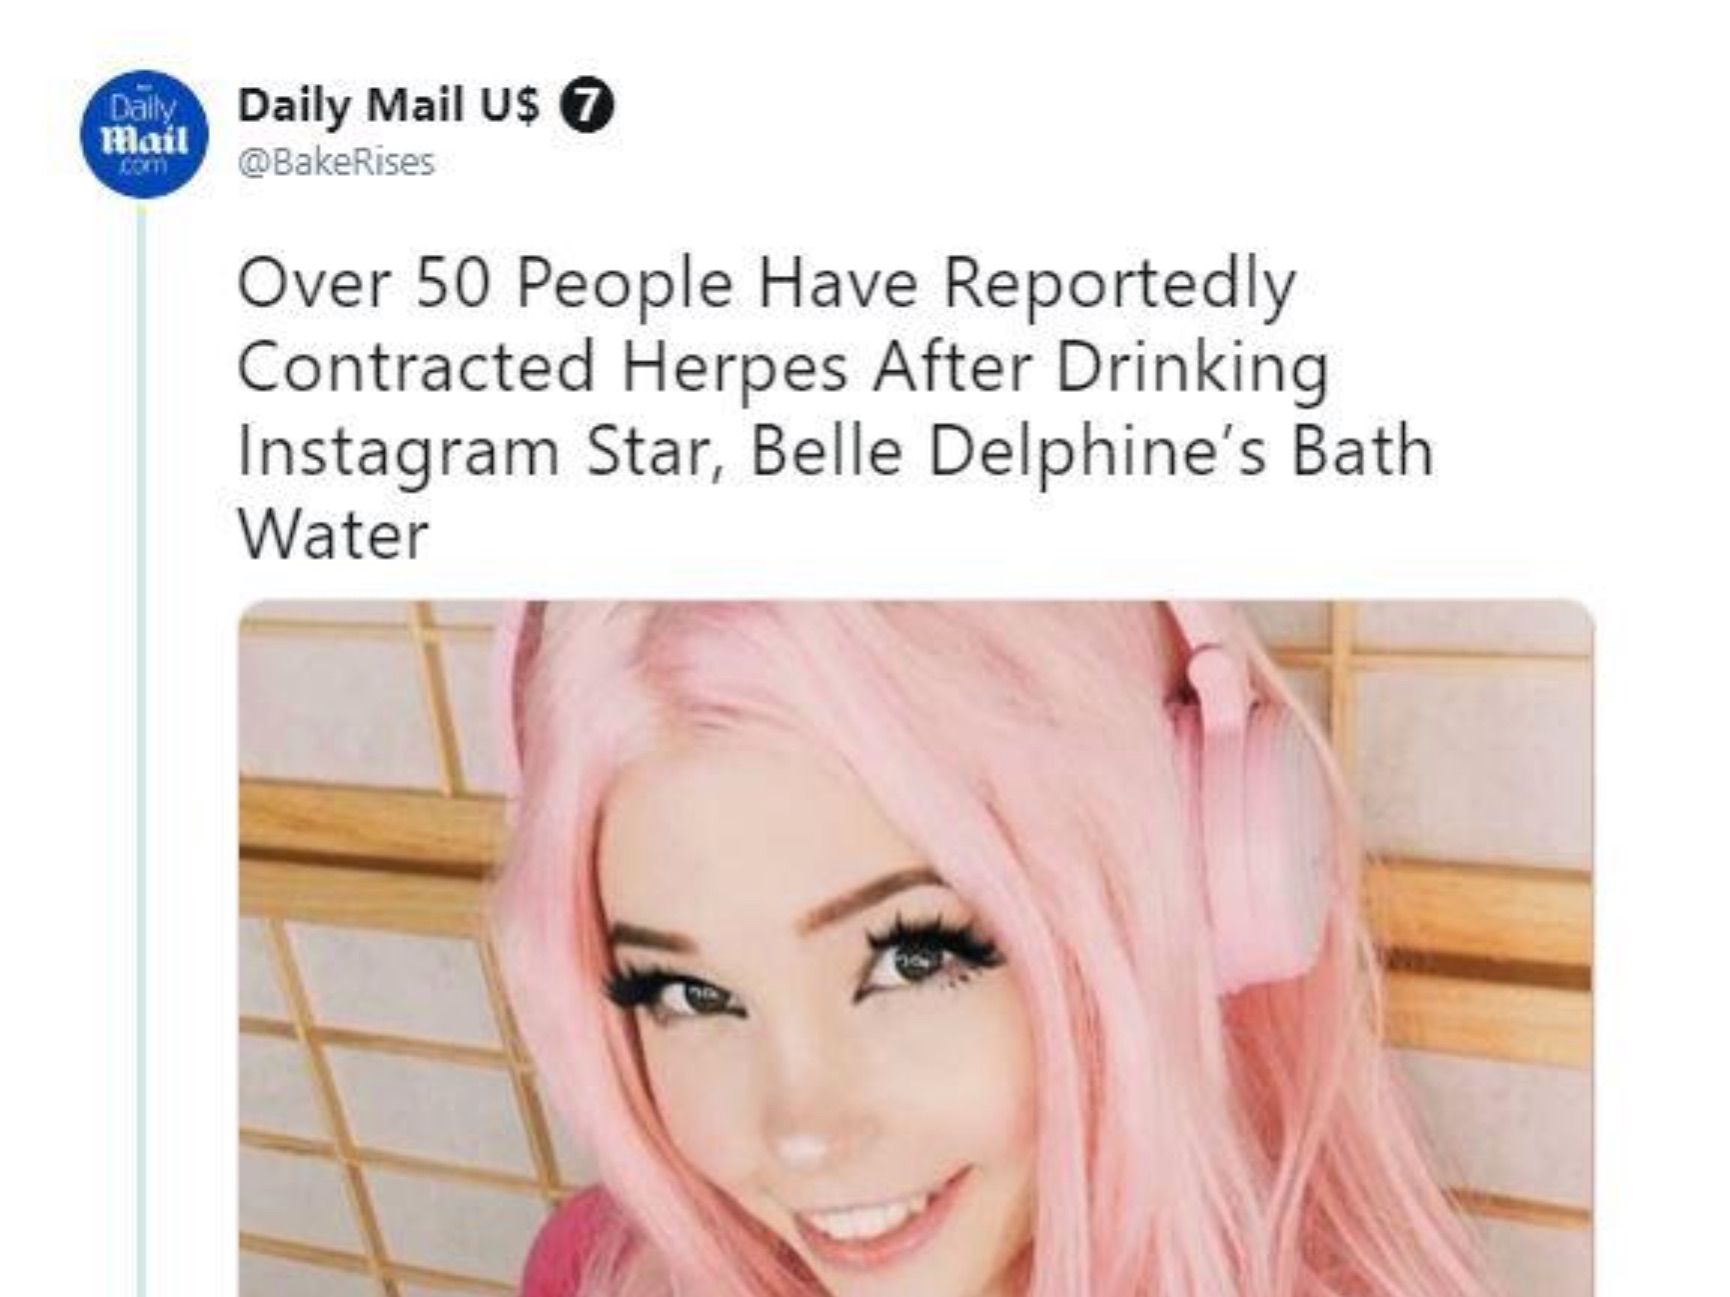 herpes-belle-delphine-bathwater-daily-mail